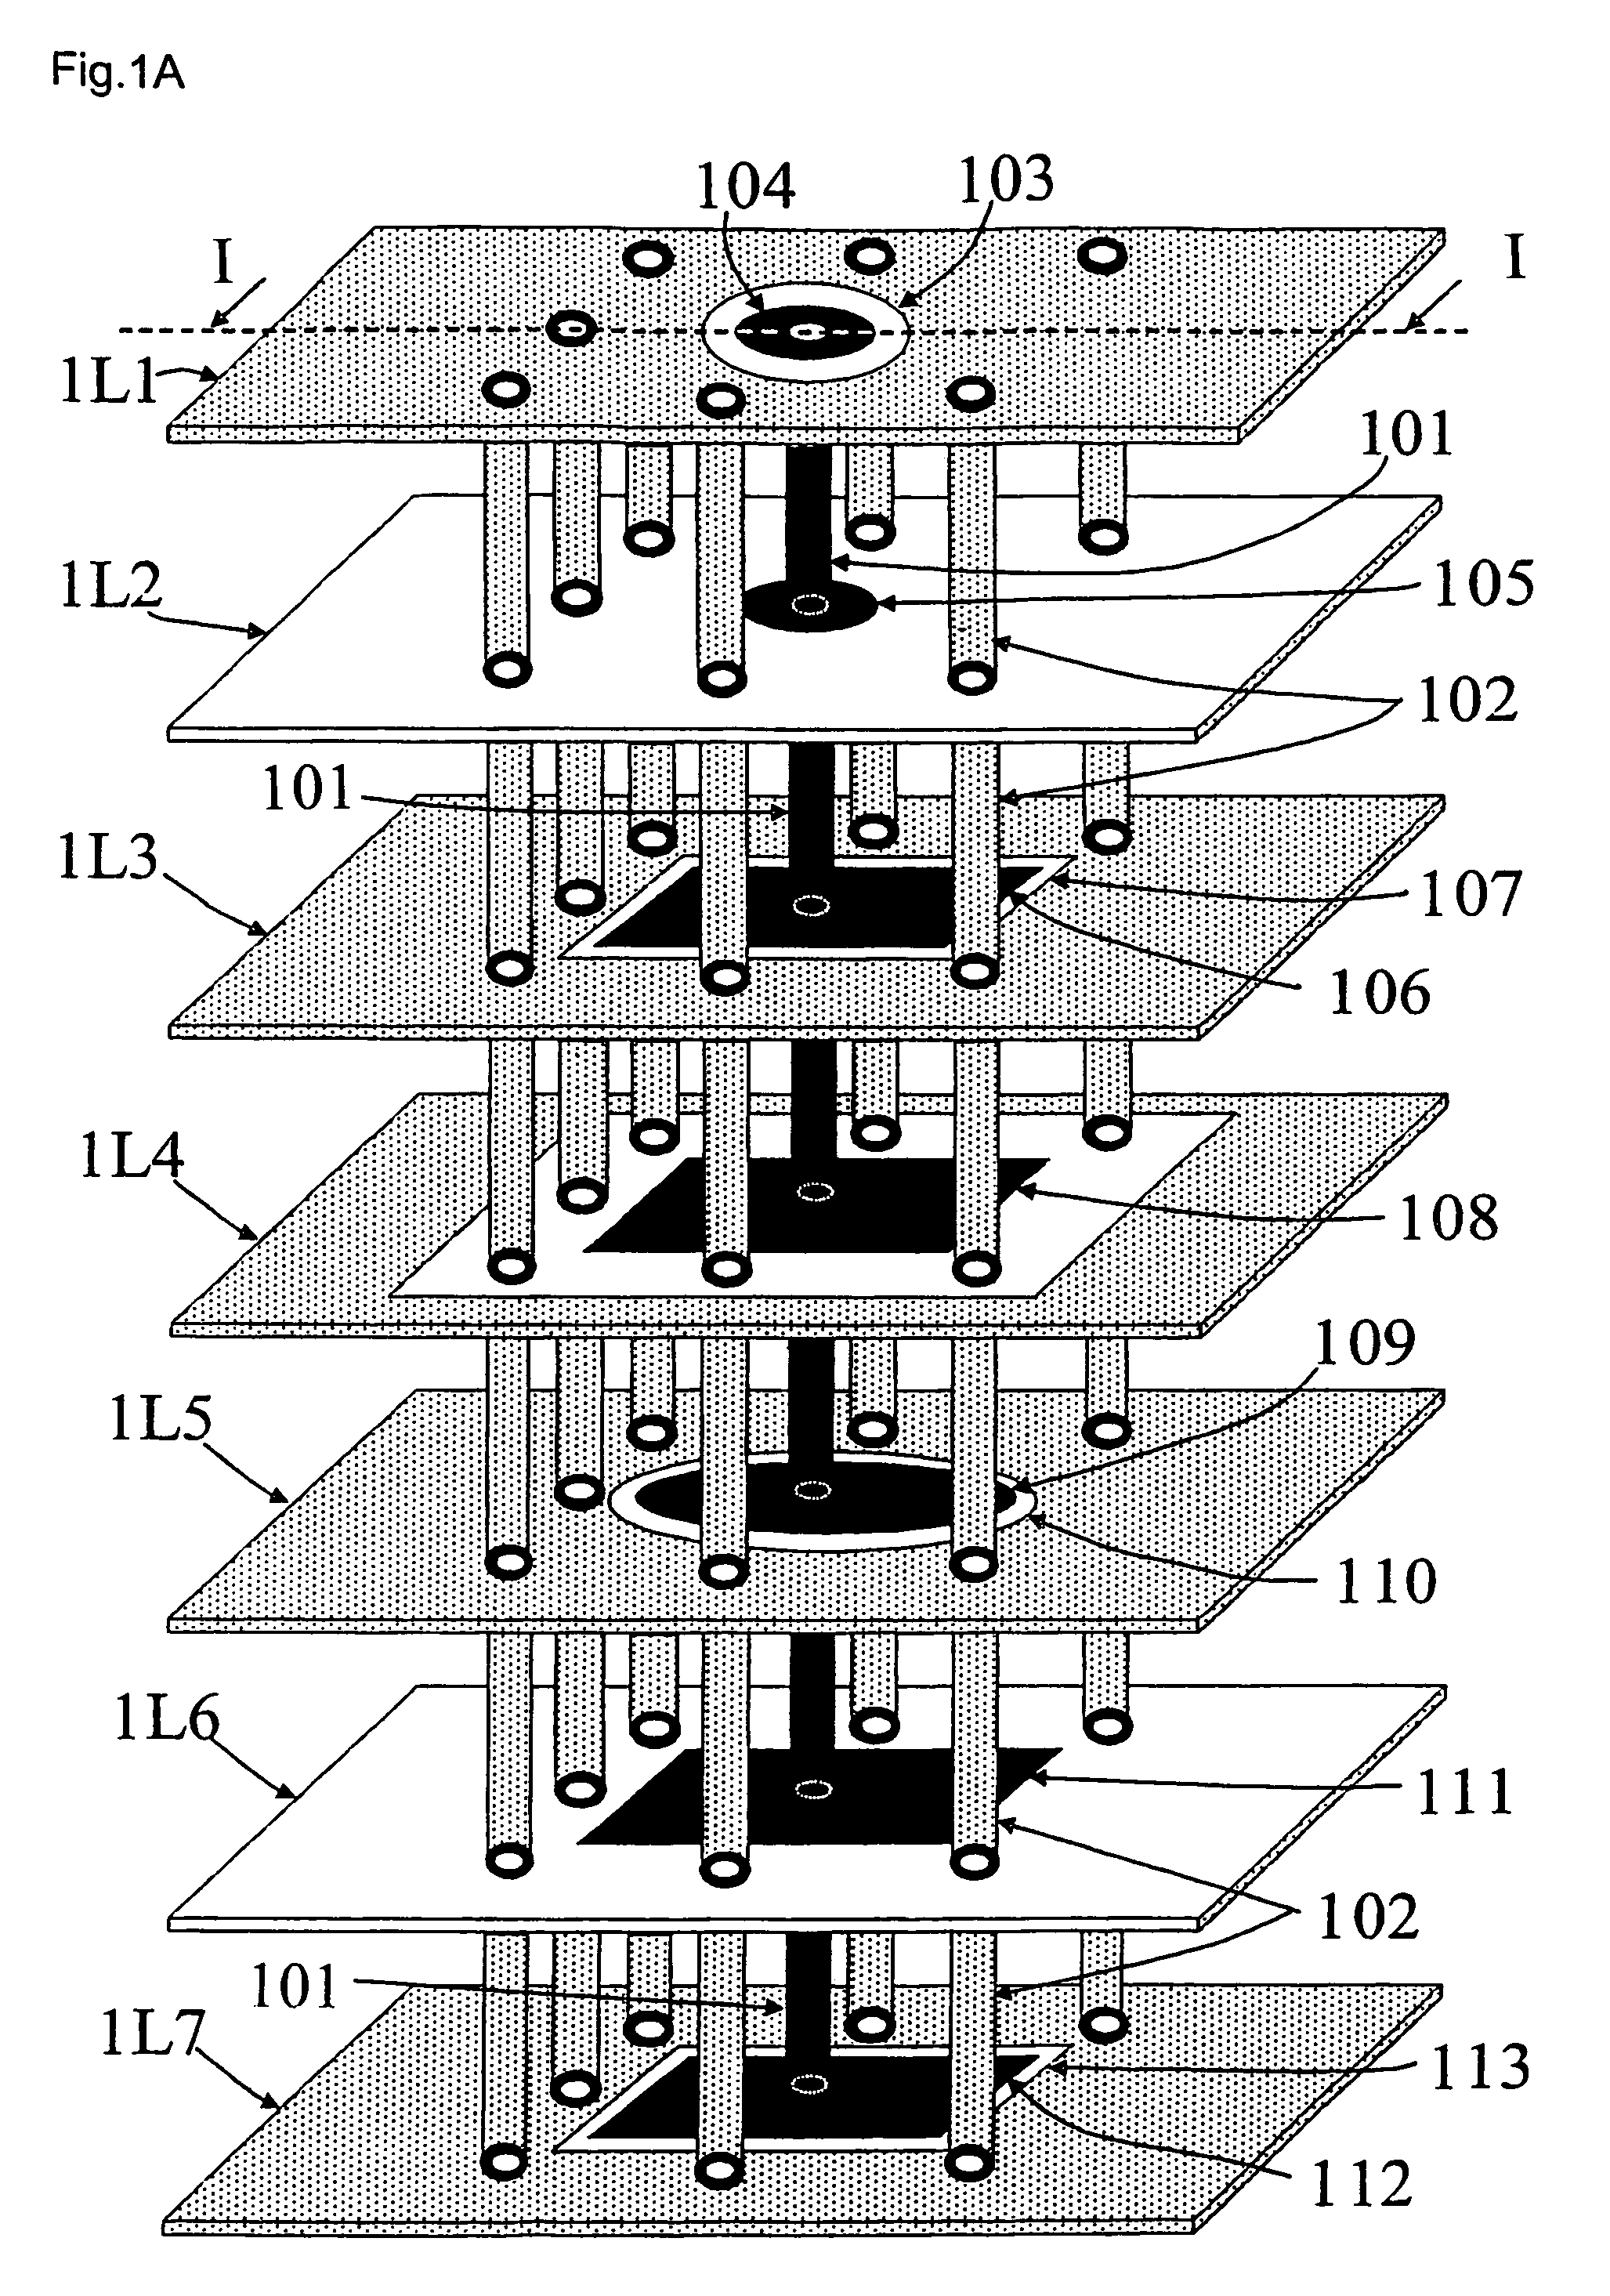 Composite via structures and filters in multilayer printed circuit boards